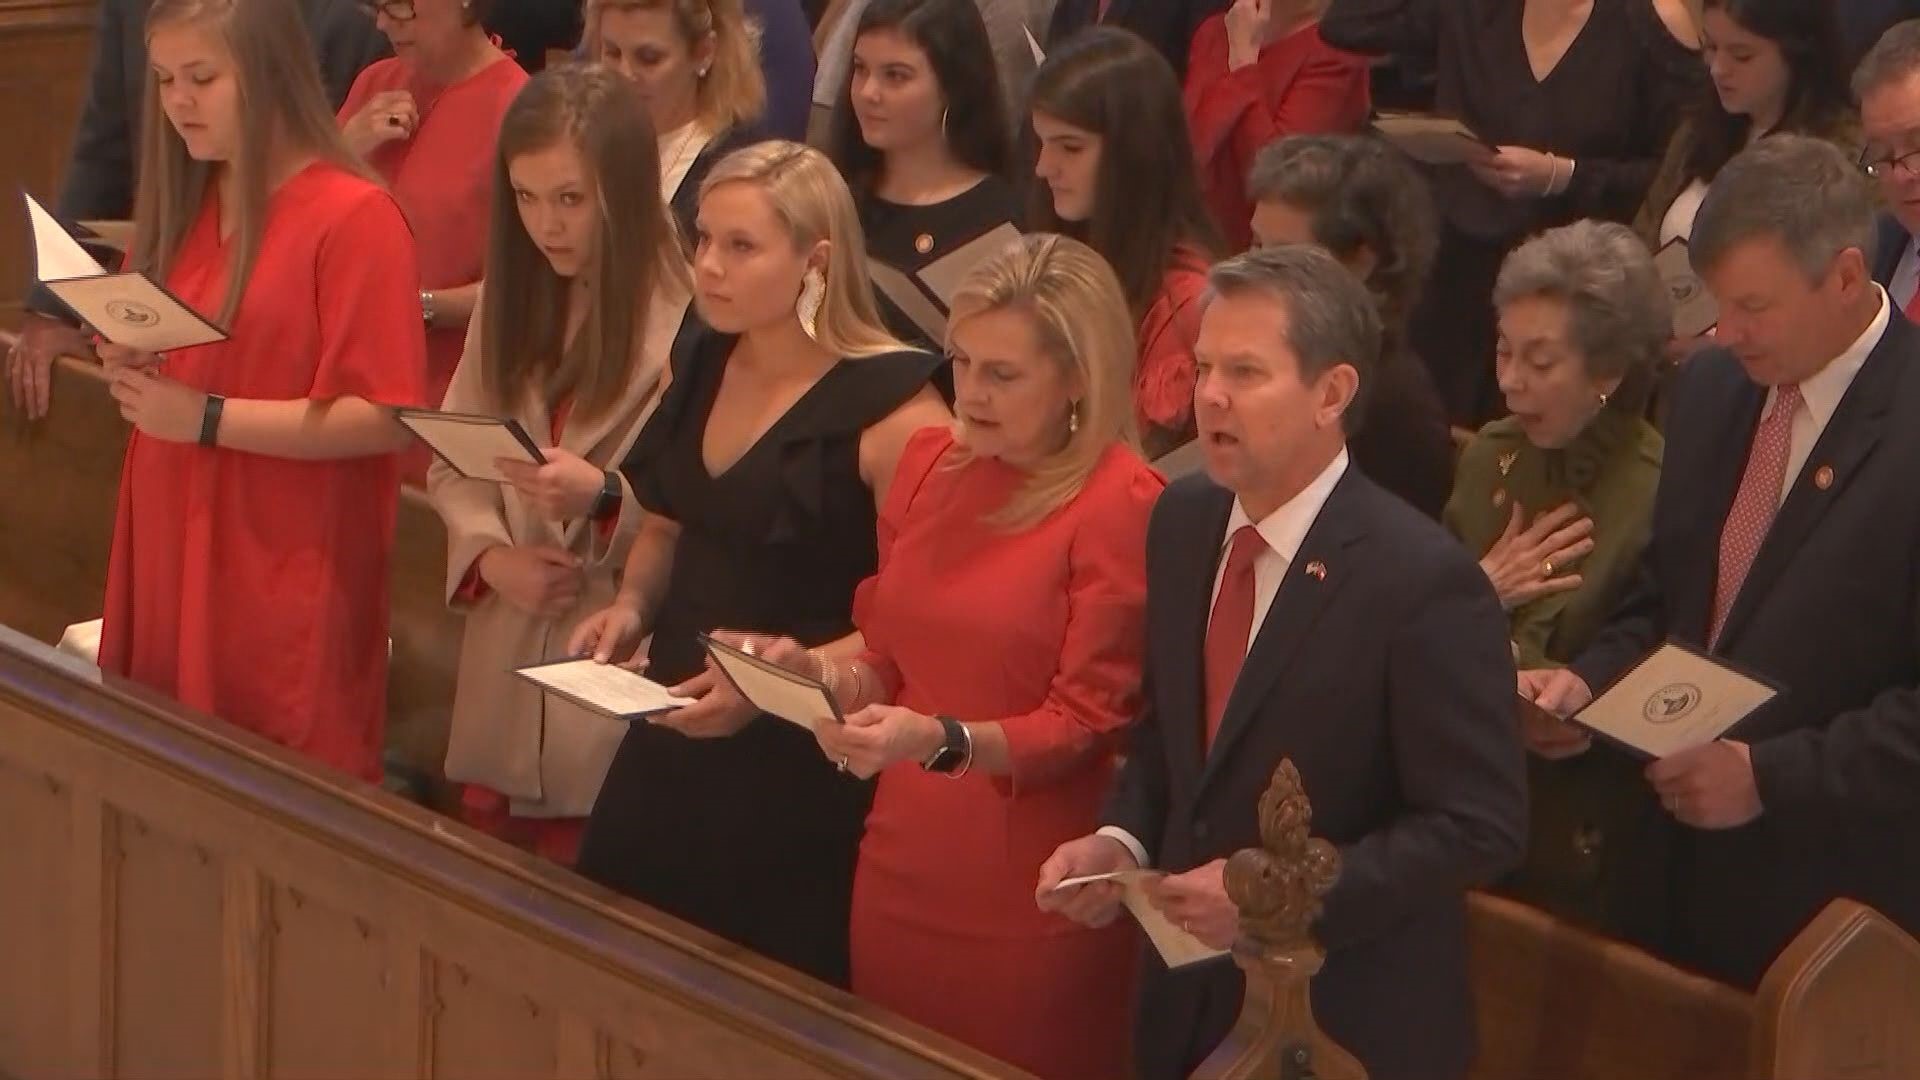 Brian Kemp's inauguration as the 83rd governor of Georgia started out with a prayer service at The Cathedral of St. Phillips in Atlanta.